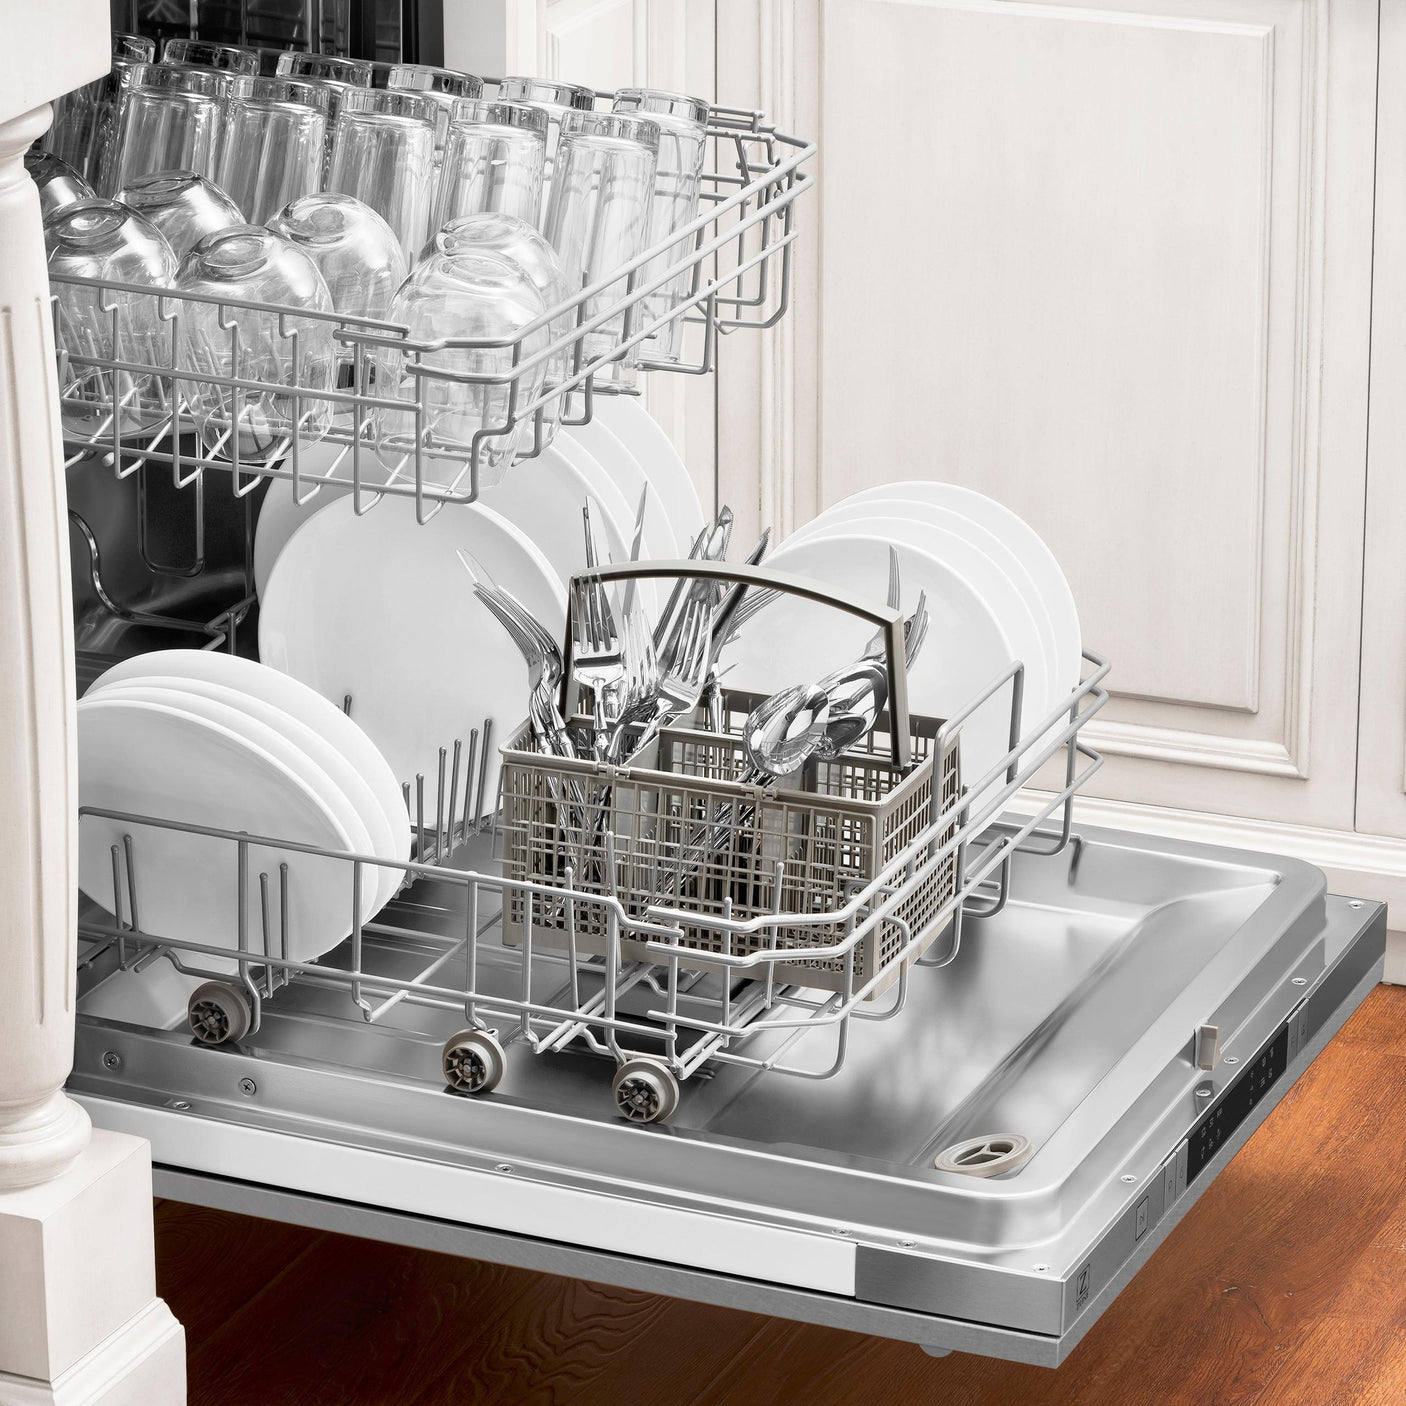 ZLINE 18 in. Compact Top Control Dishwasher with Stainless Steel Tub and Modern Style Handle, 52 dBa (DW-18) [Color: DuraSnow Stainless Steel]